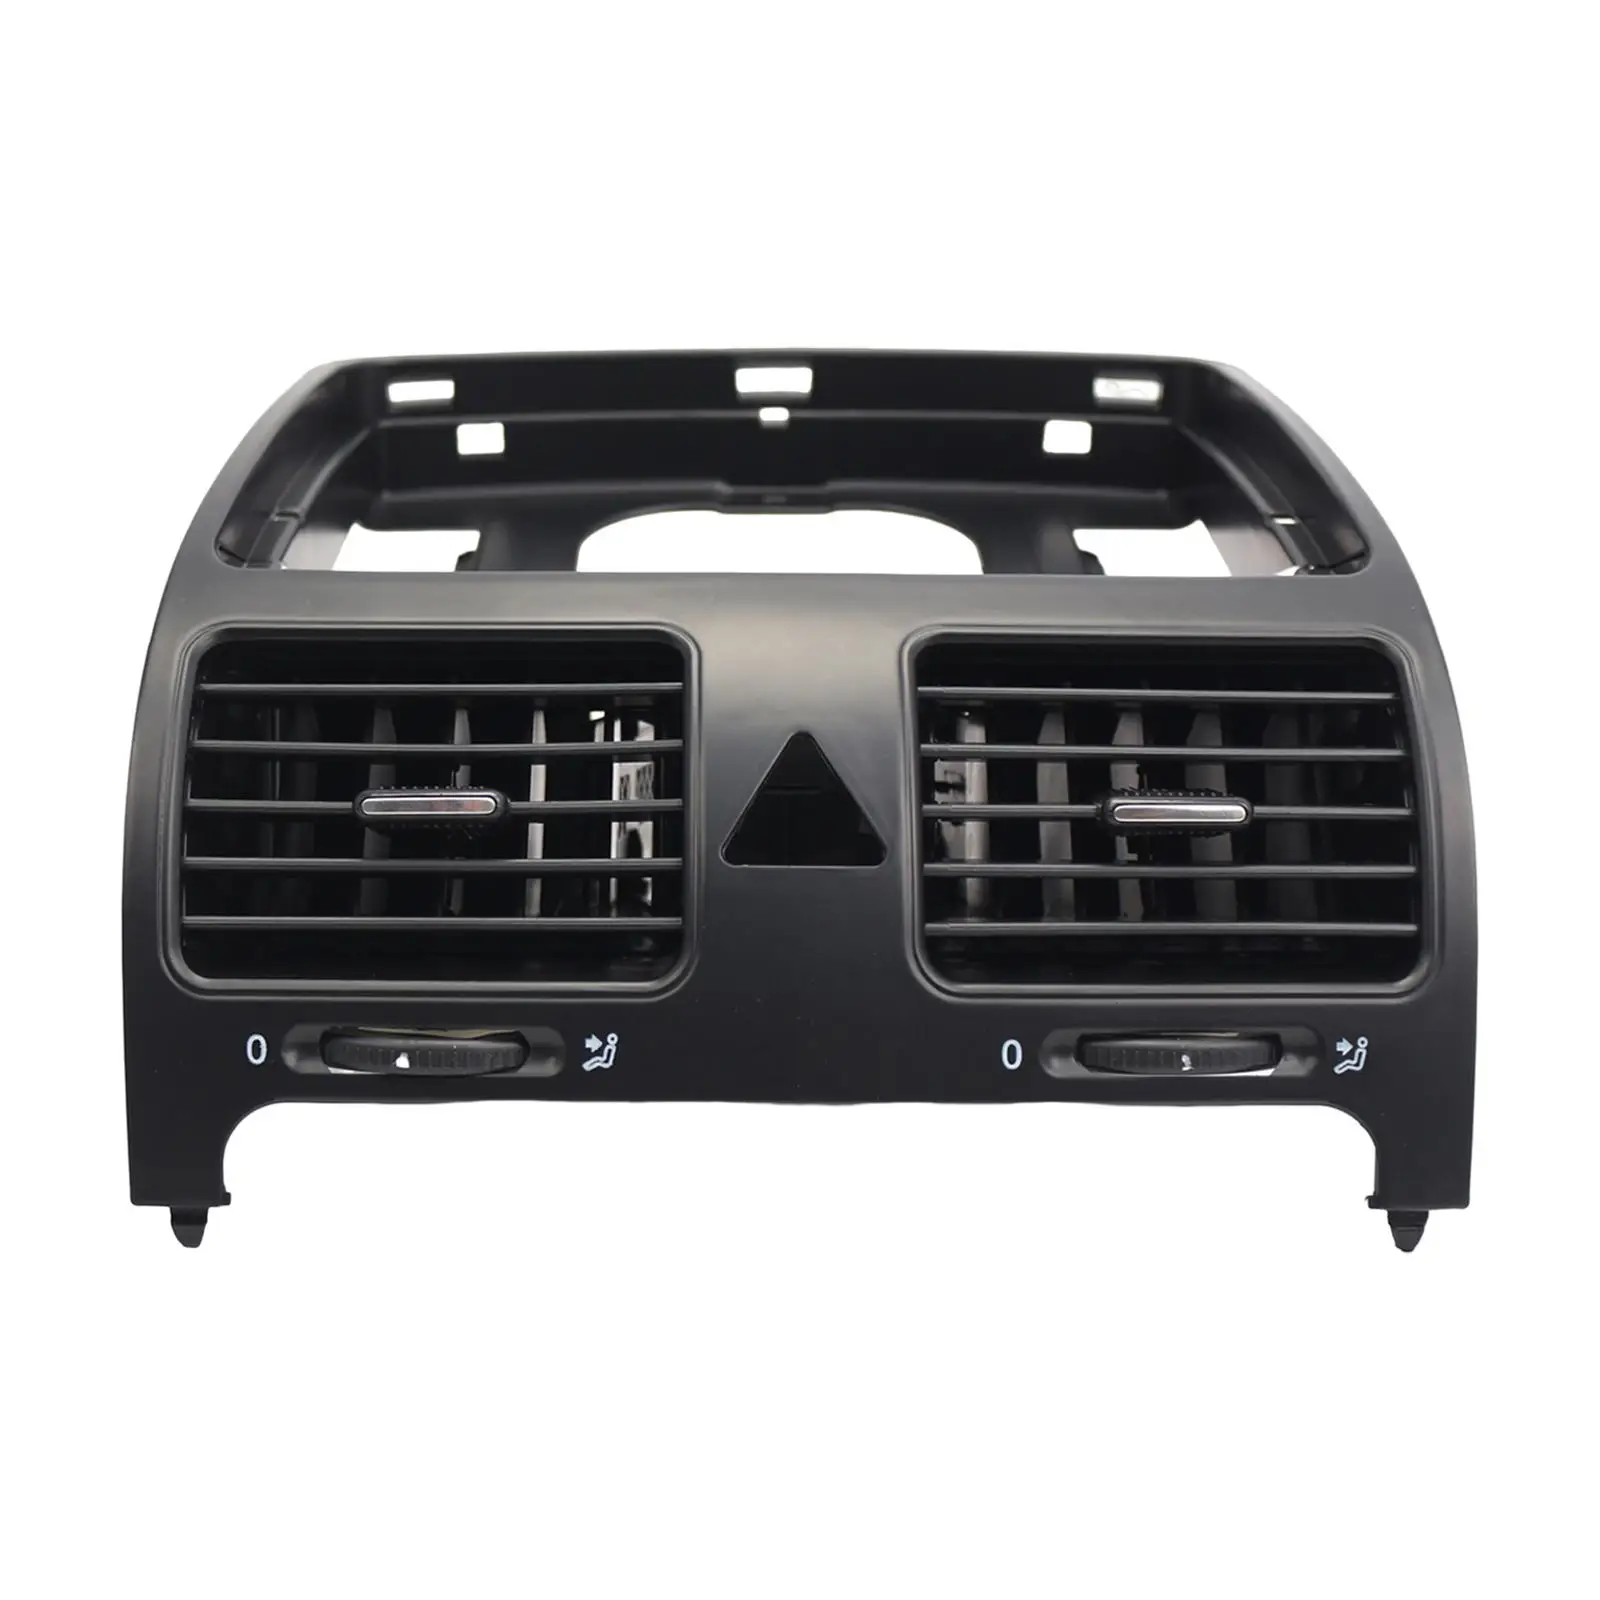 A/C Air Vent Outlet Grille Panel Center Dashboard for forVW Golf MK5 1K0819728H 1K0819743B 1K0 819 728 Car Replacement